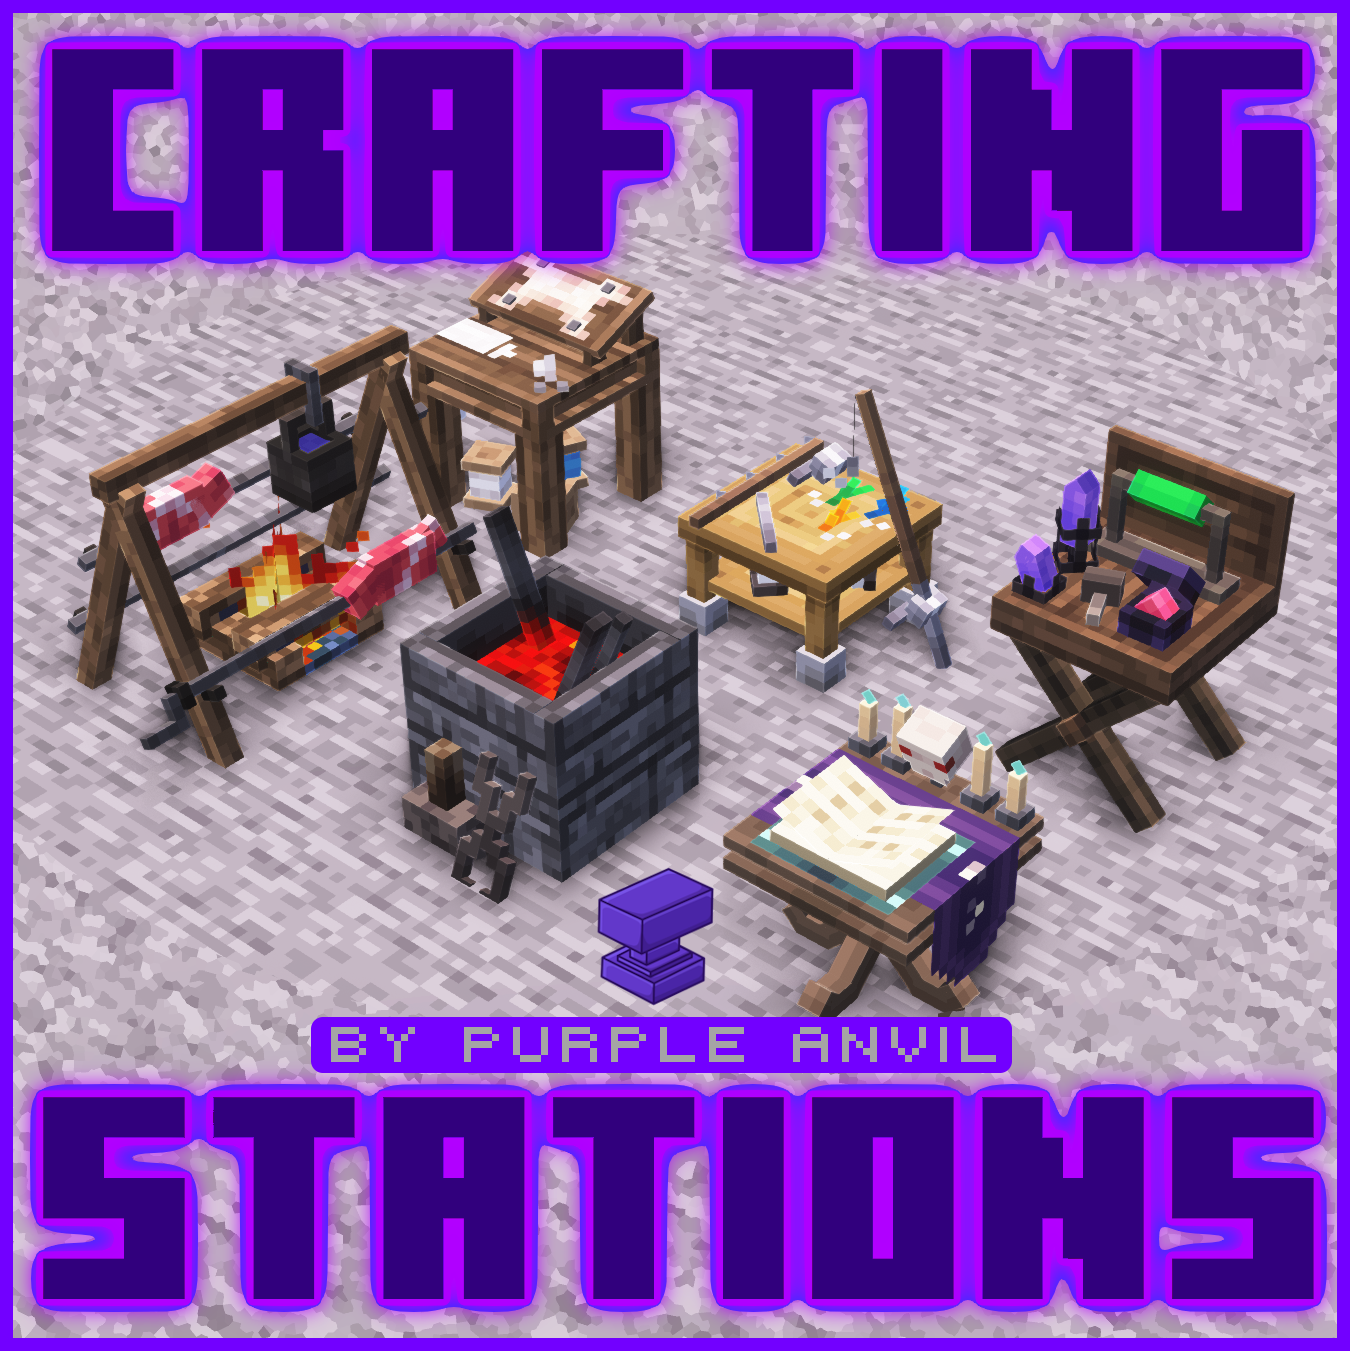 craftingstations.png